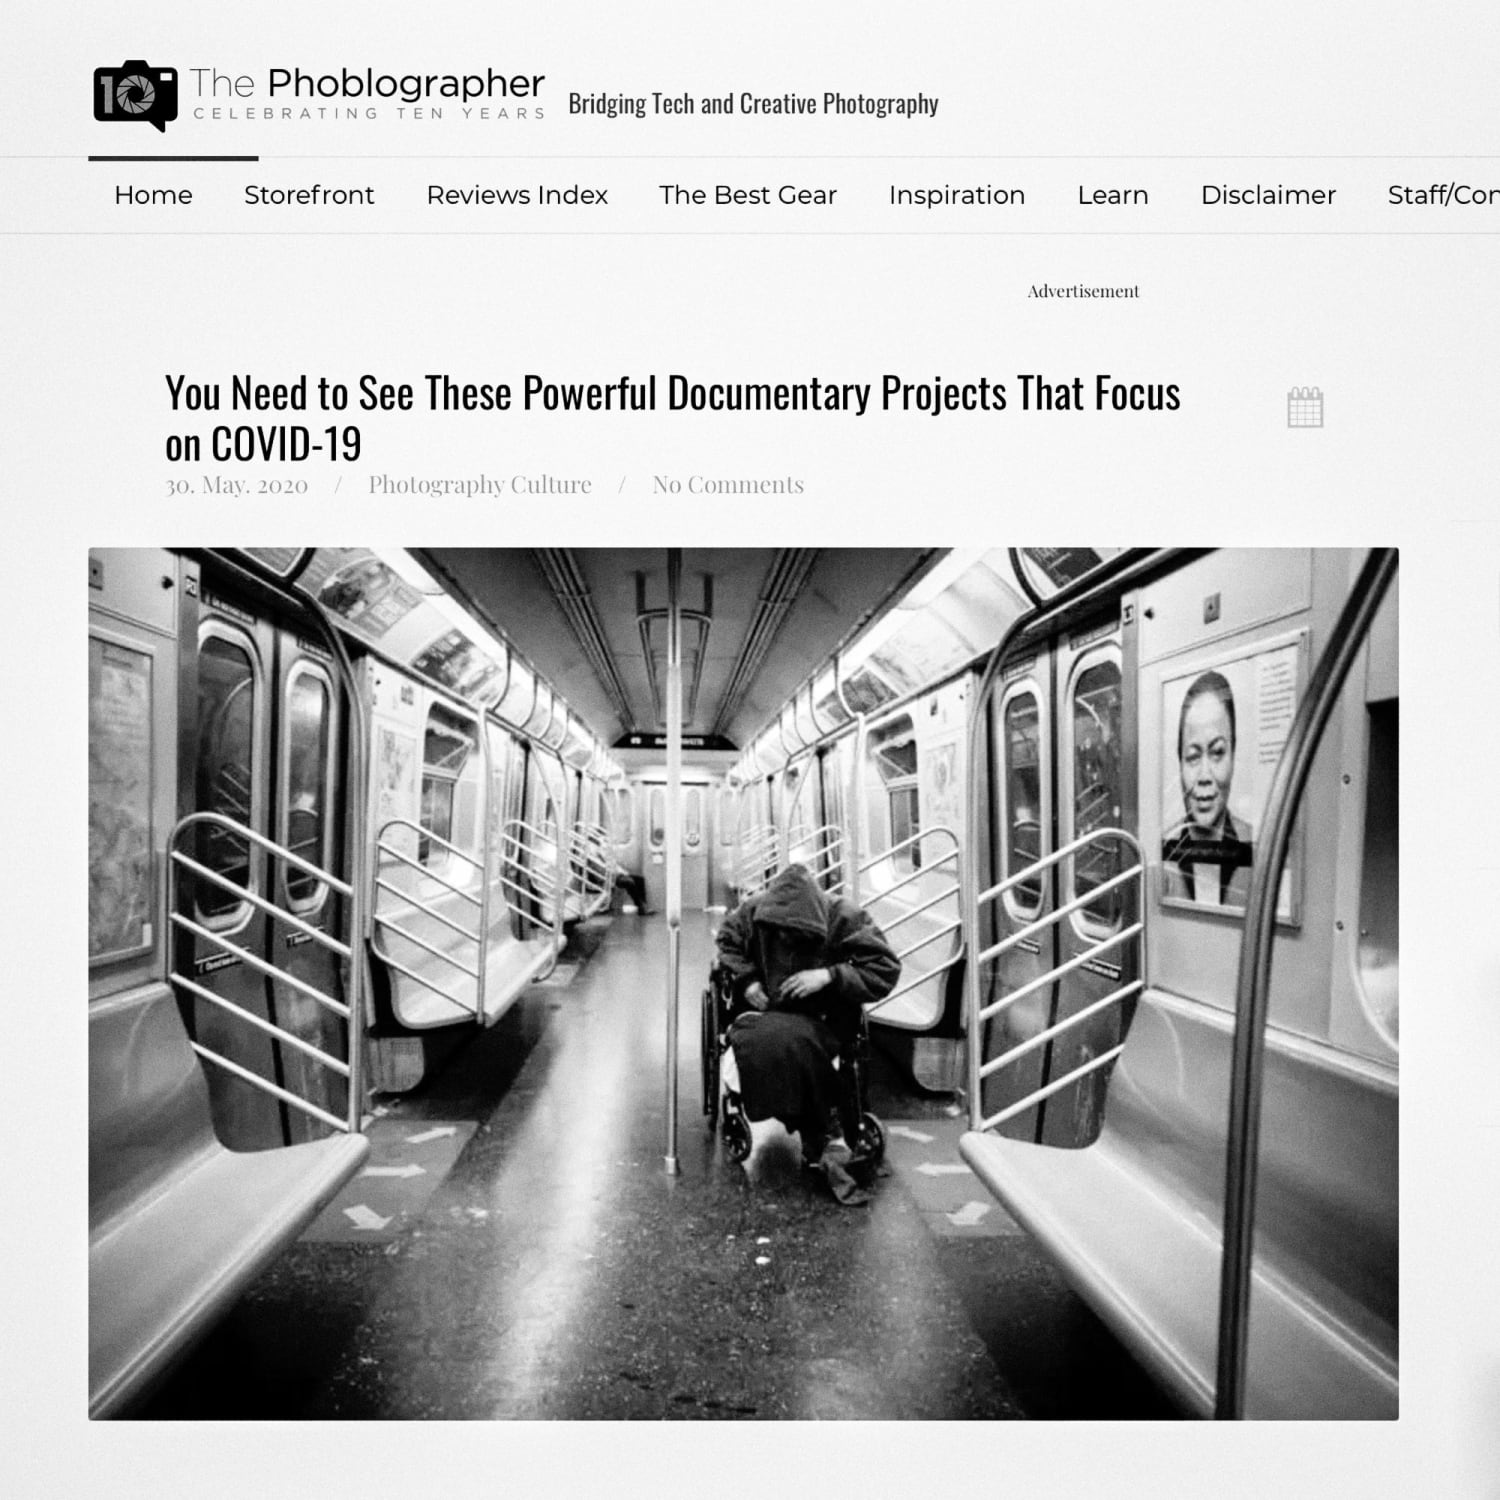 THE PHOBLOGRAPHER: YOU NEED TO SEE THESE POWERFUL DOCUMENTARY PROJECTS